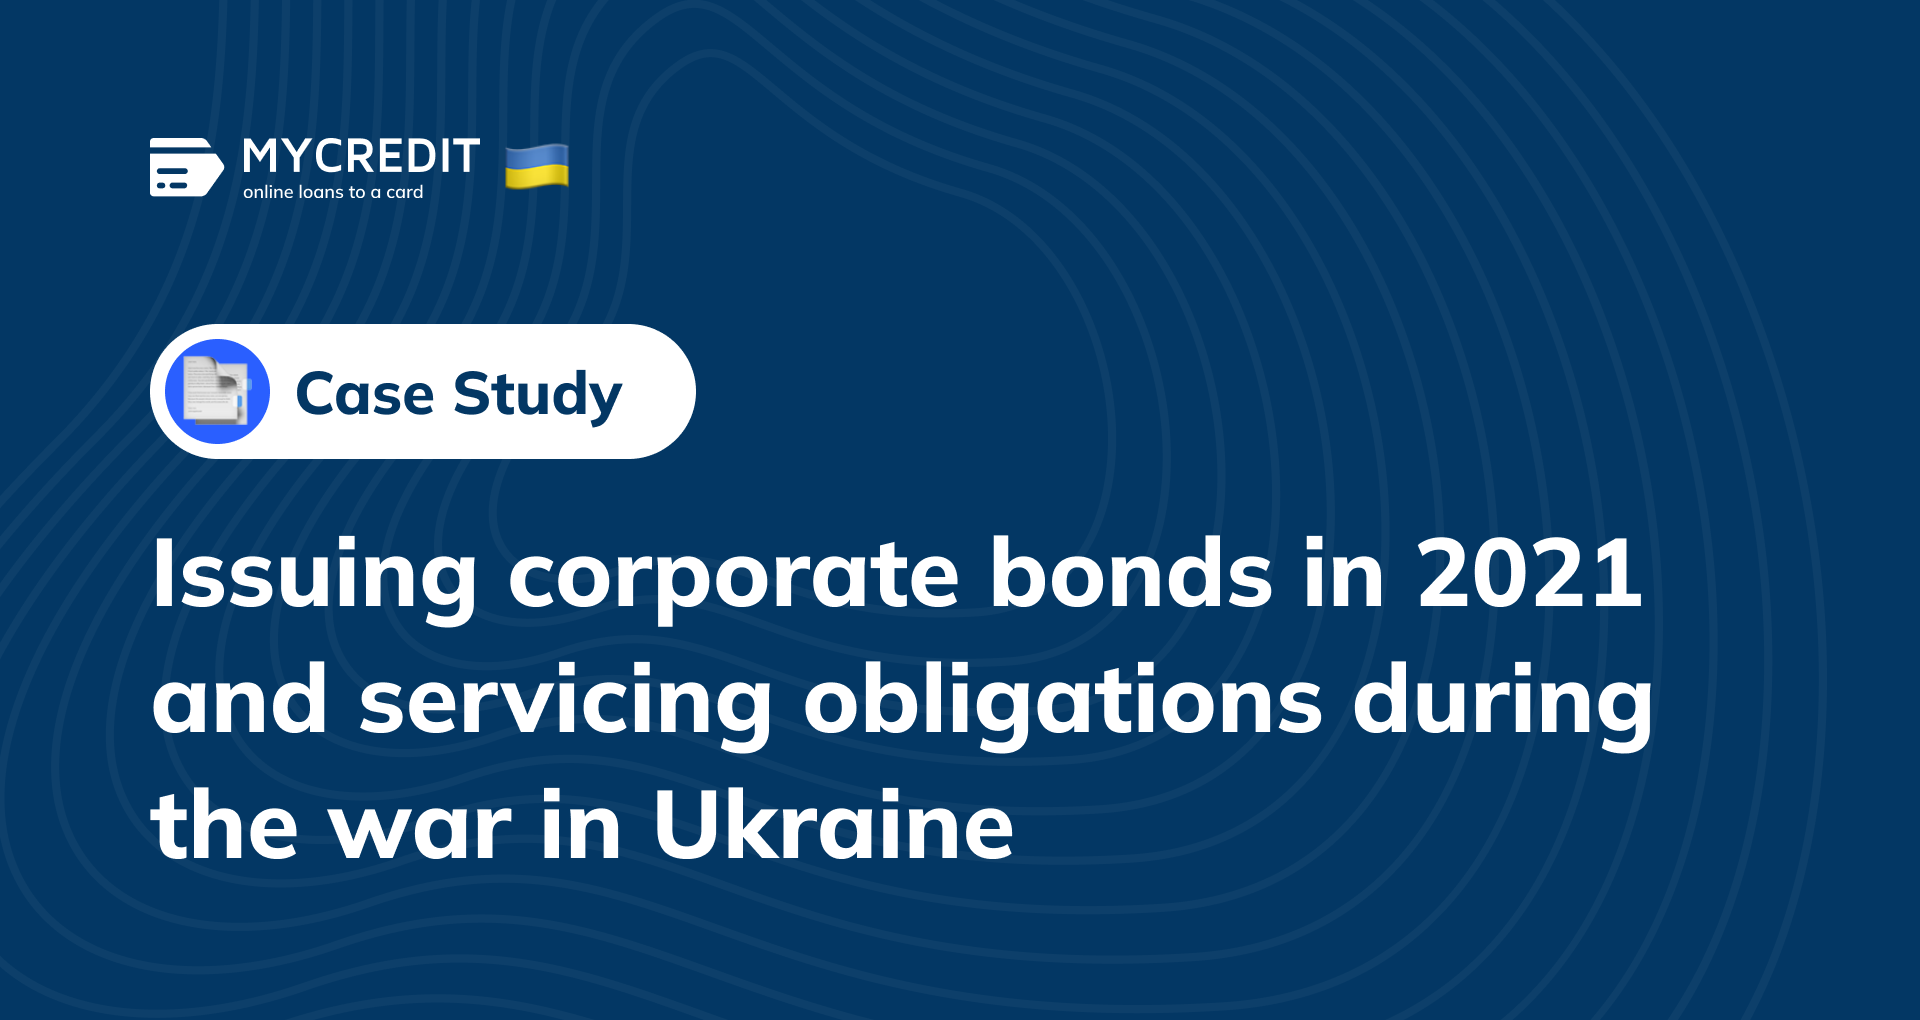 Issuing corporate bonds in 2021 and servicing obligations during the war in Ukraine